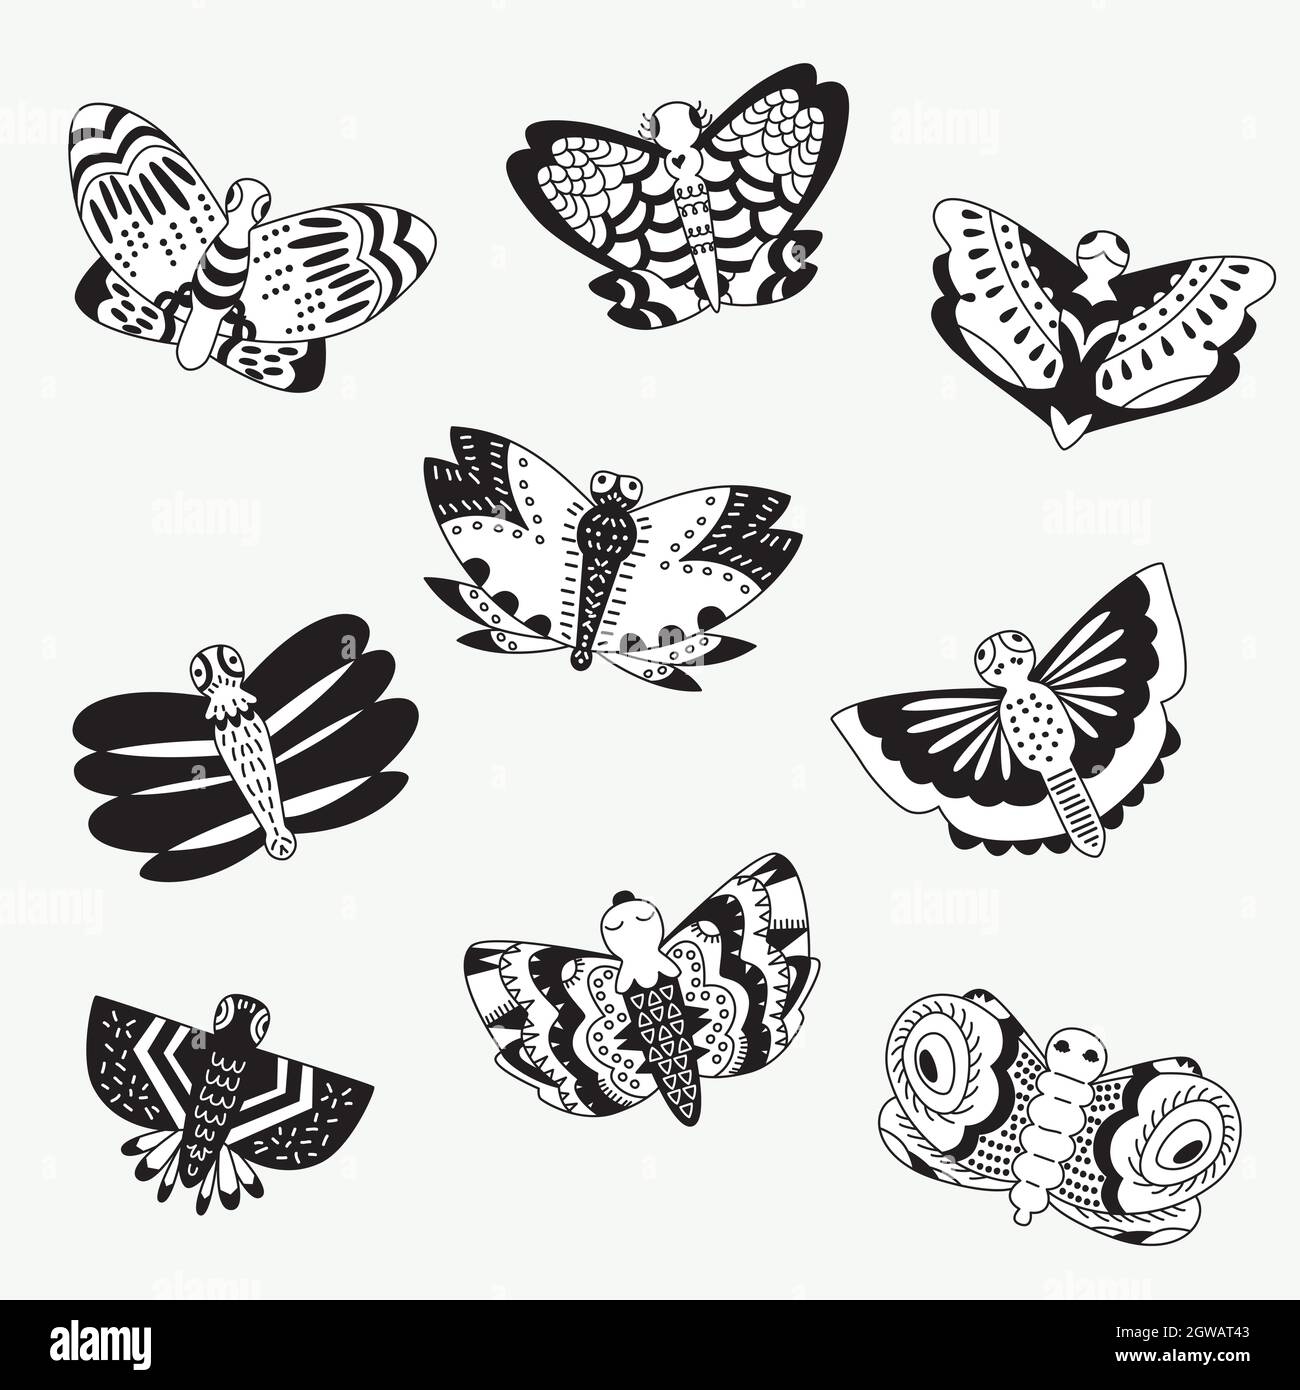 Hand Drawn Butterflies. Moth, insect, flying bugs, night critters. Black and white two tone. Stock Vector